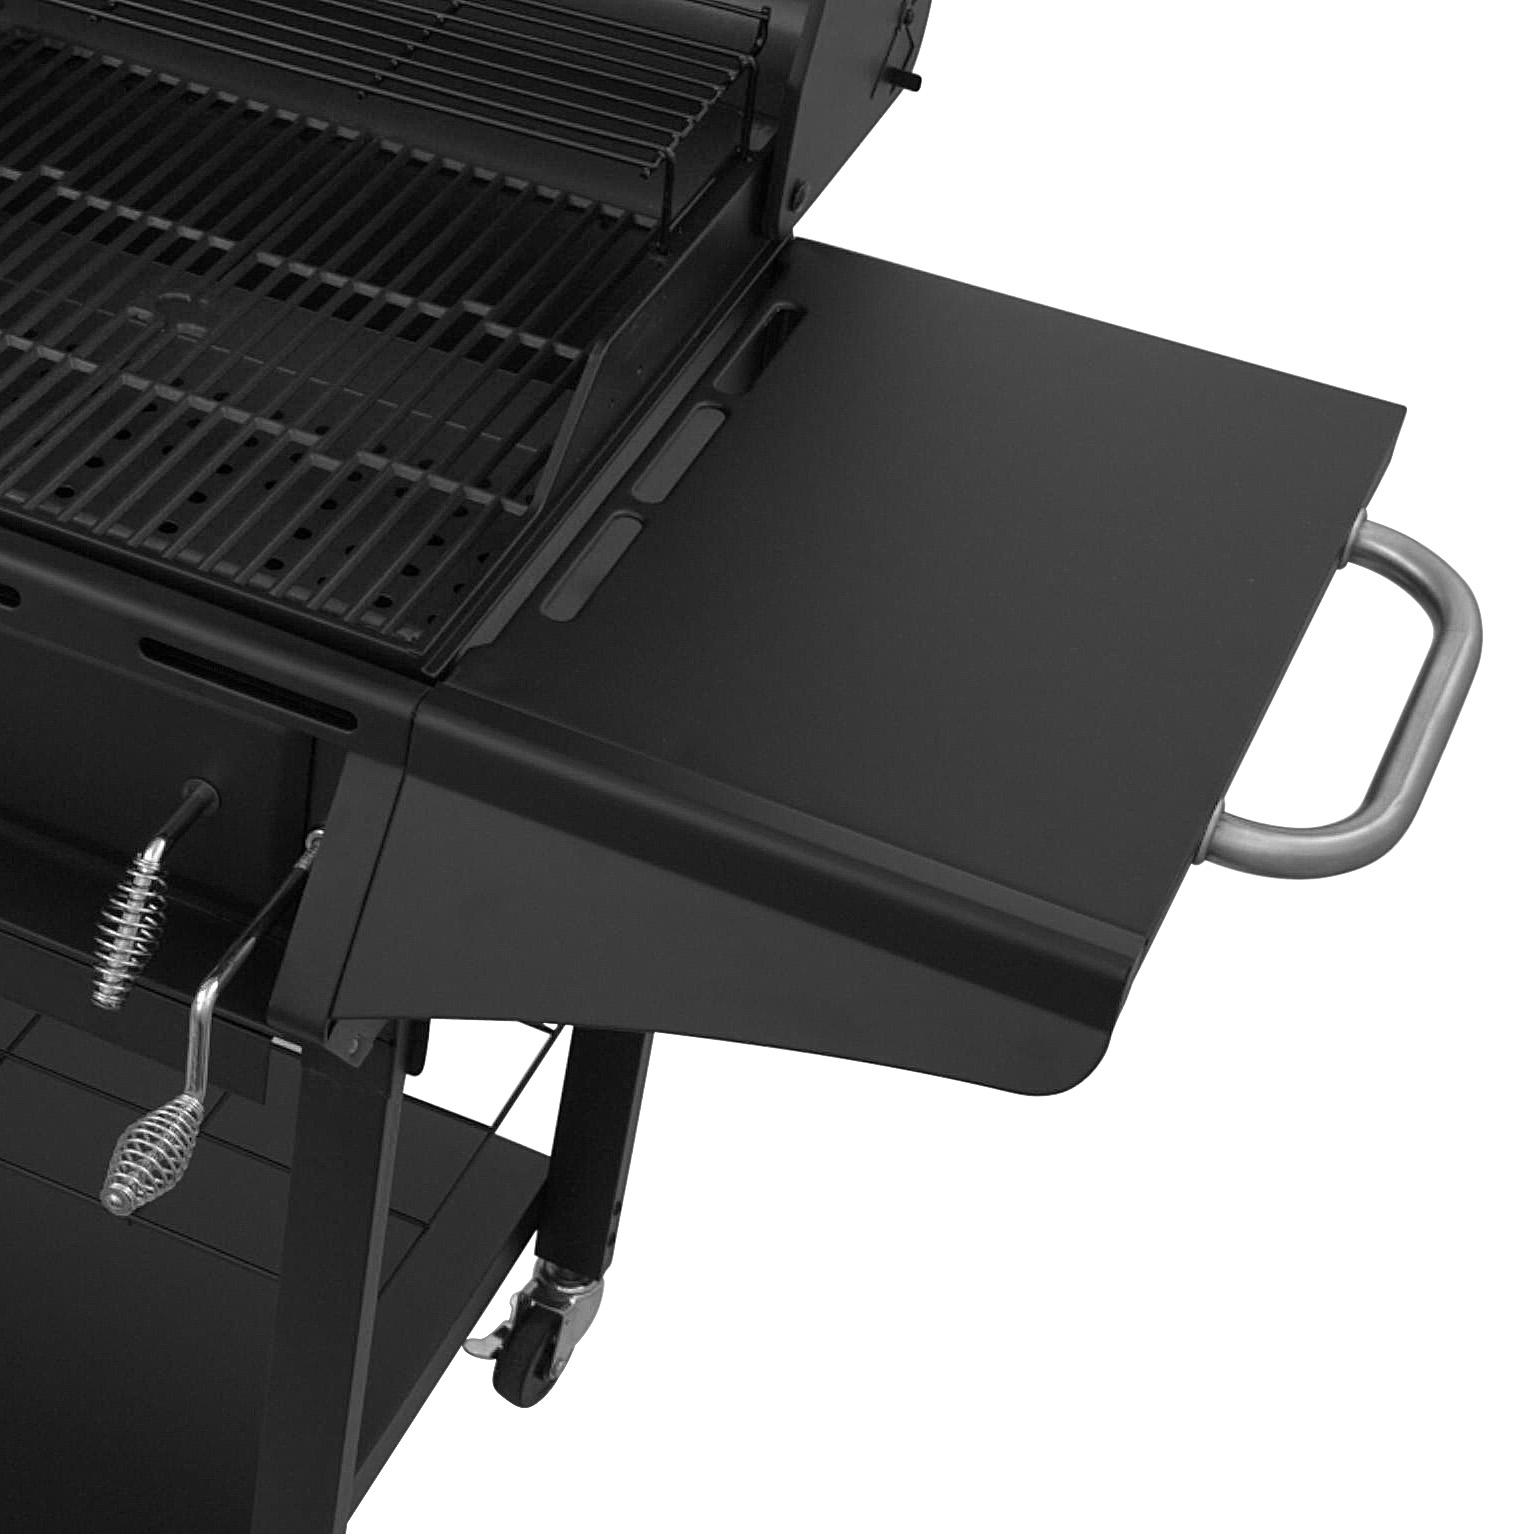 Char-Broil Deluxe Charcoal & Gas Combination Cart Grill - image 2 of 8